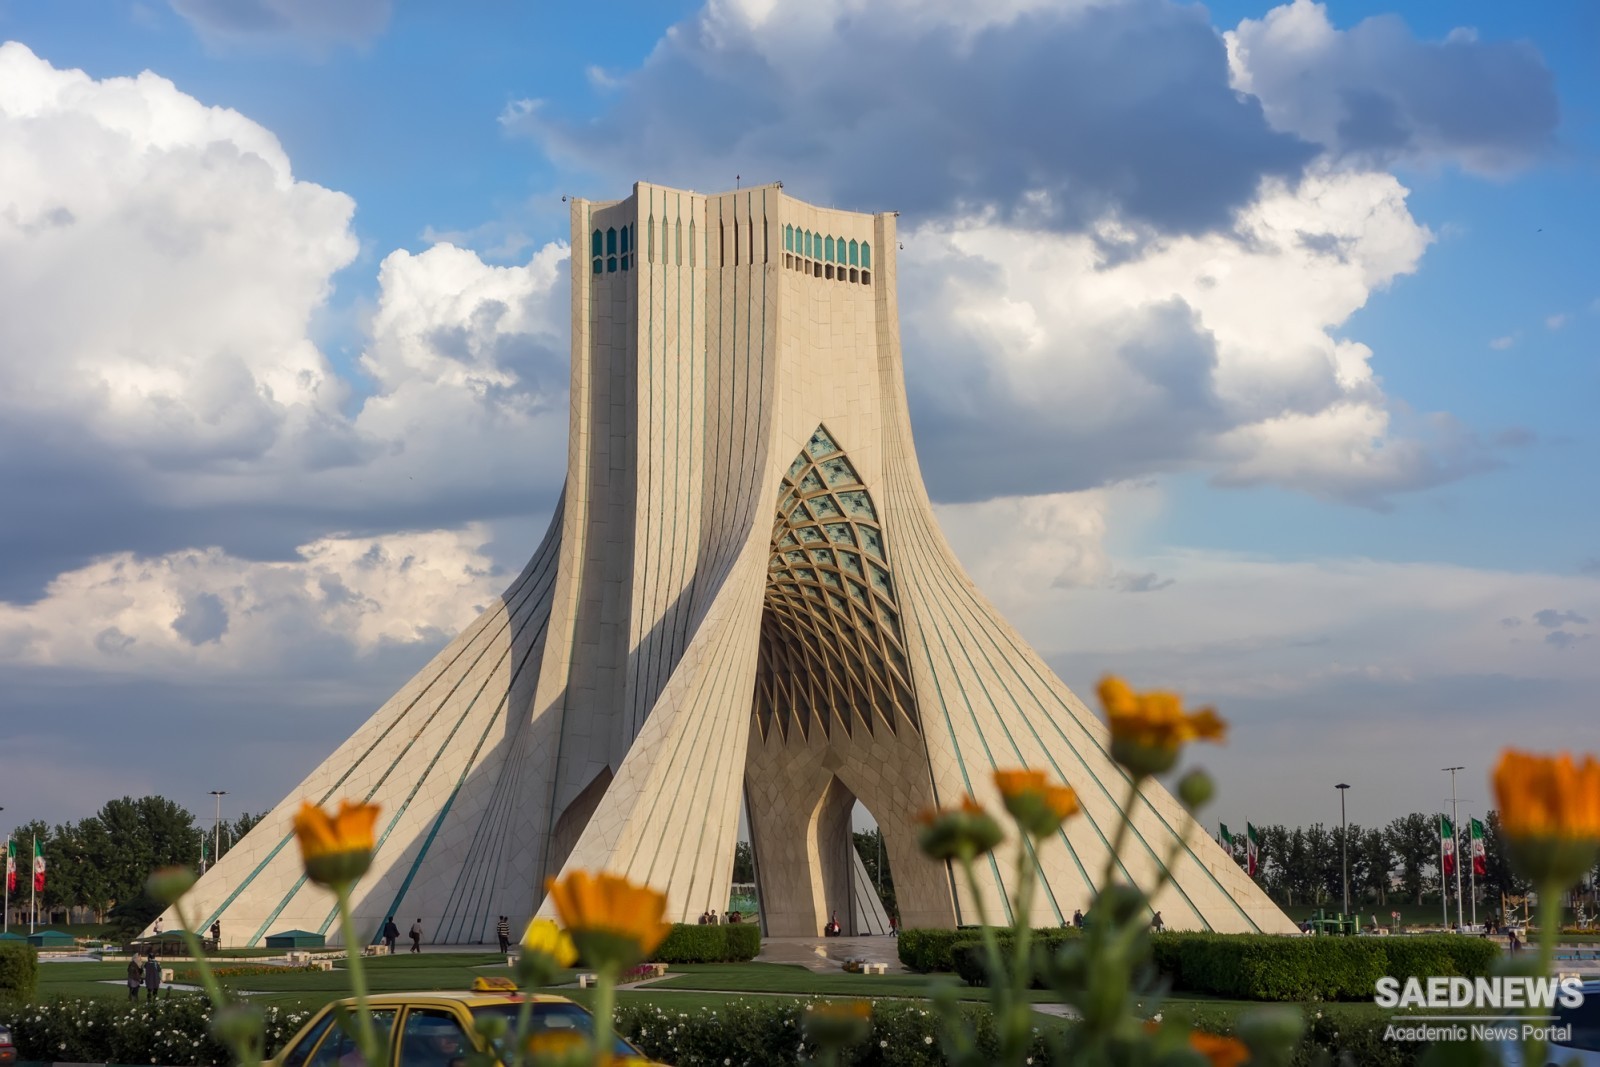 Iran Home to the Largest Innovation Ecosystem in the Middle East